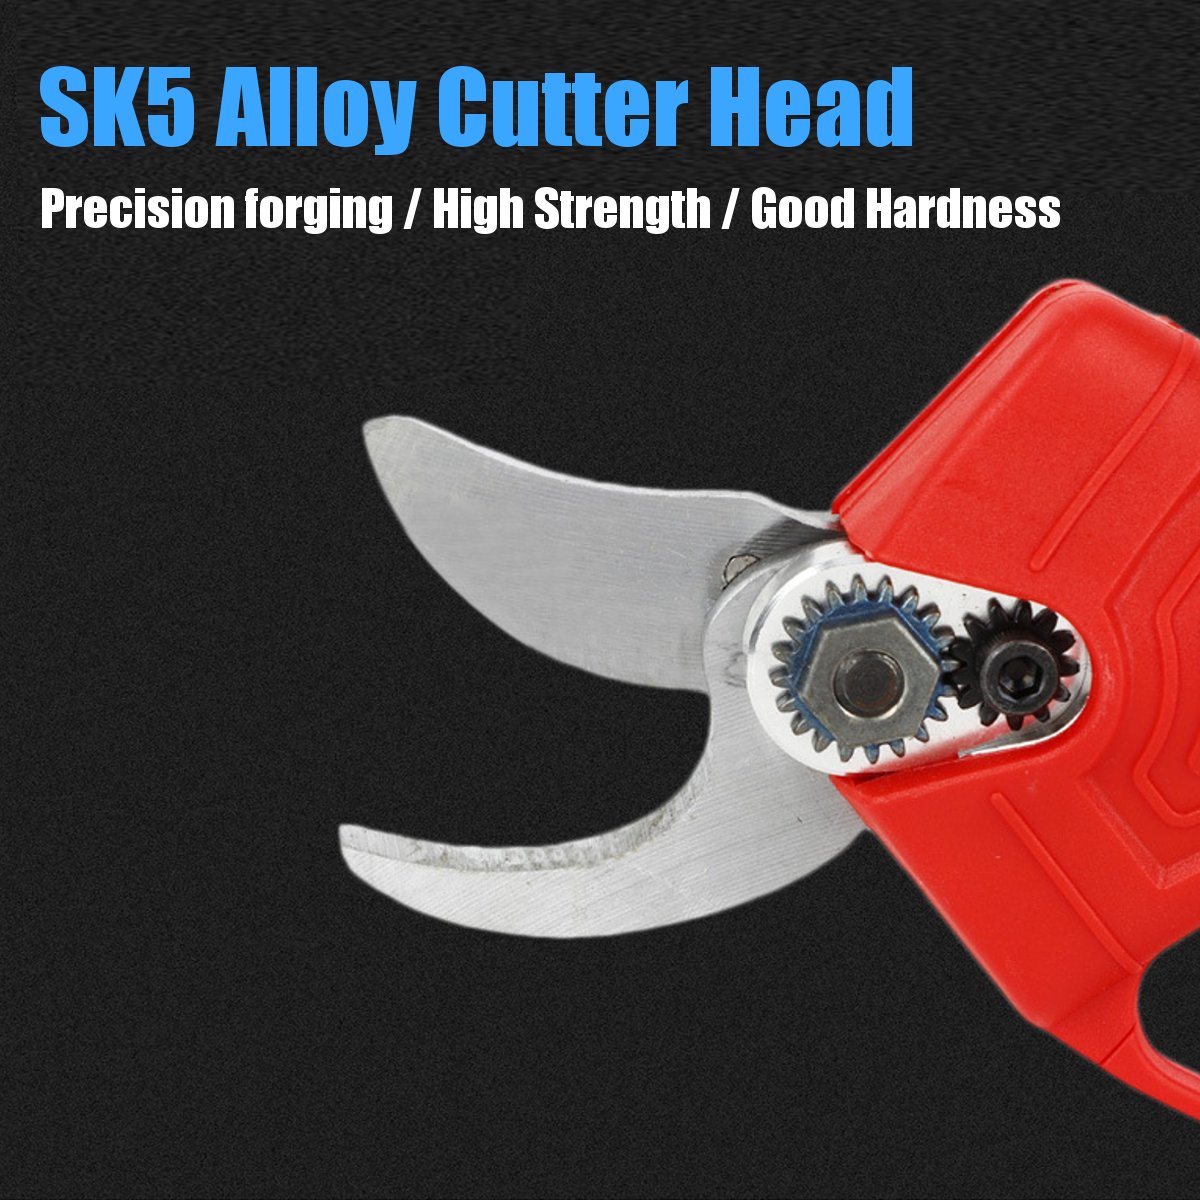 168V--21V-Rechargeable-Lithium-Electric-Cordless-Secateur-Pruning-Shears-Garden-Branch-Cutter-1572180-6